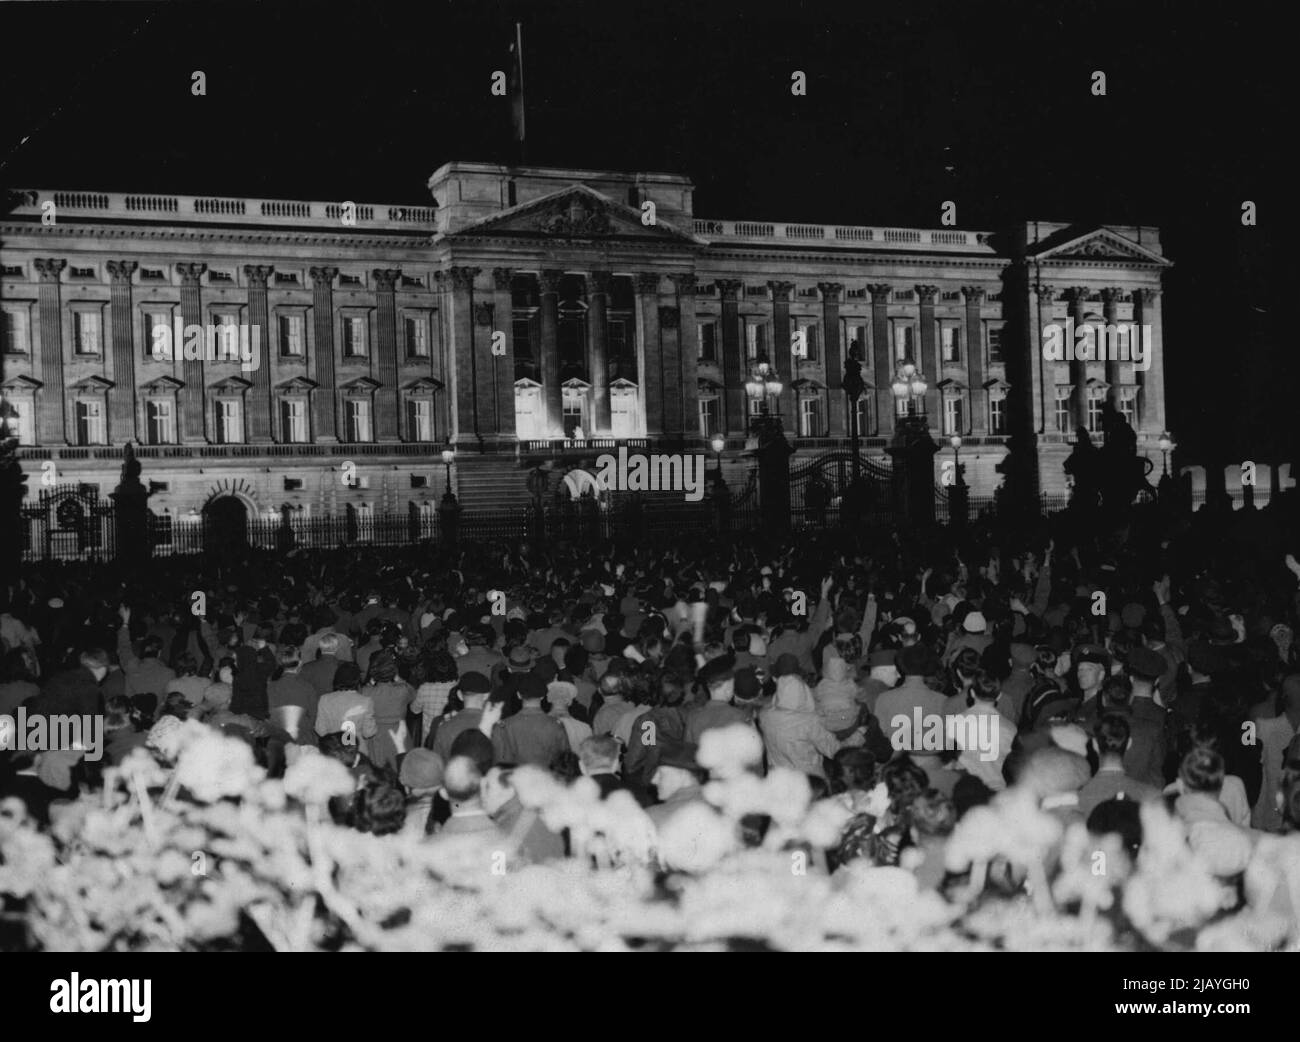 40,000 ***** The Palace - The Time: 11.30 p.m. A vast crowd is massed outside floodlit Buckingham Palace, cheering and waving in the rain. And there on the brilliantly lit balcony, stands the Queen. June 03, 1953. (Photo by Daily Mail Contract Picture). Stock Photo